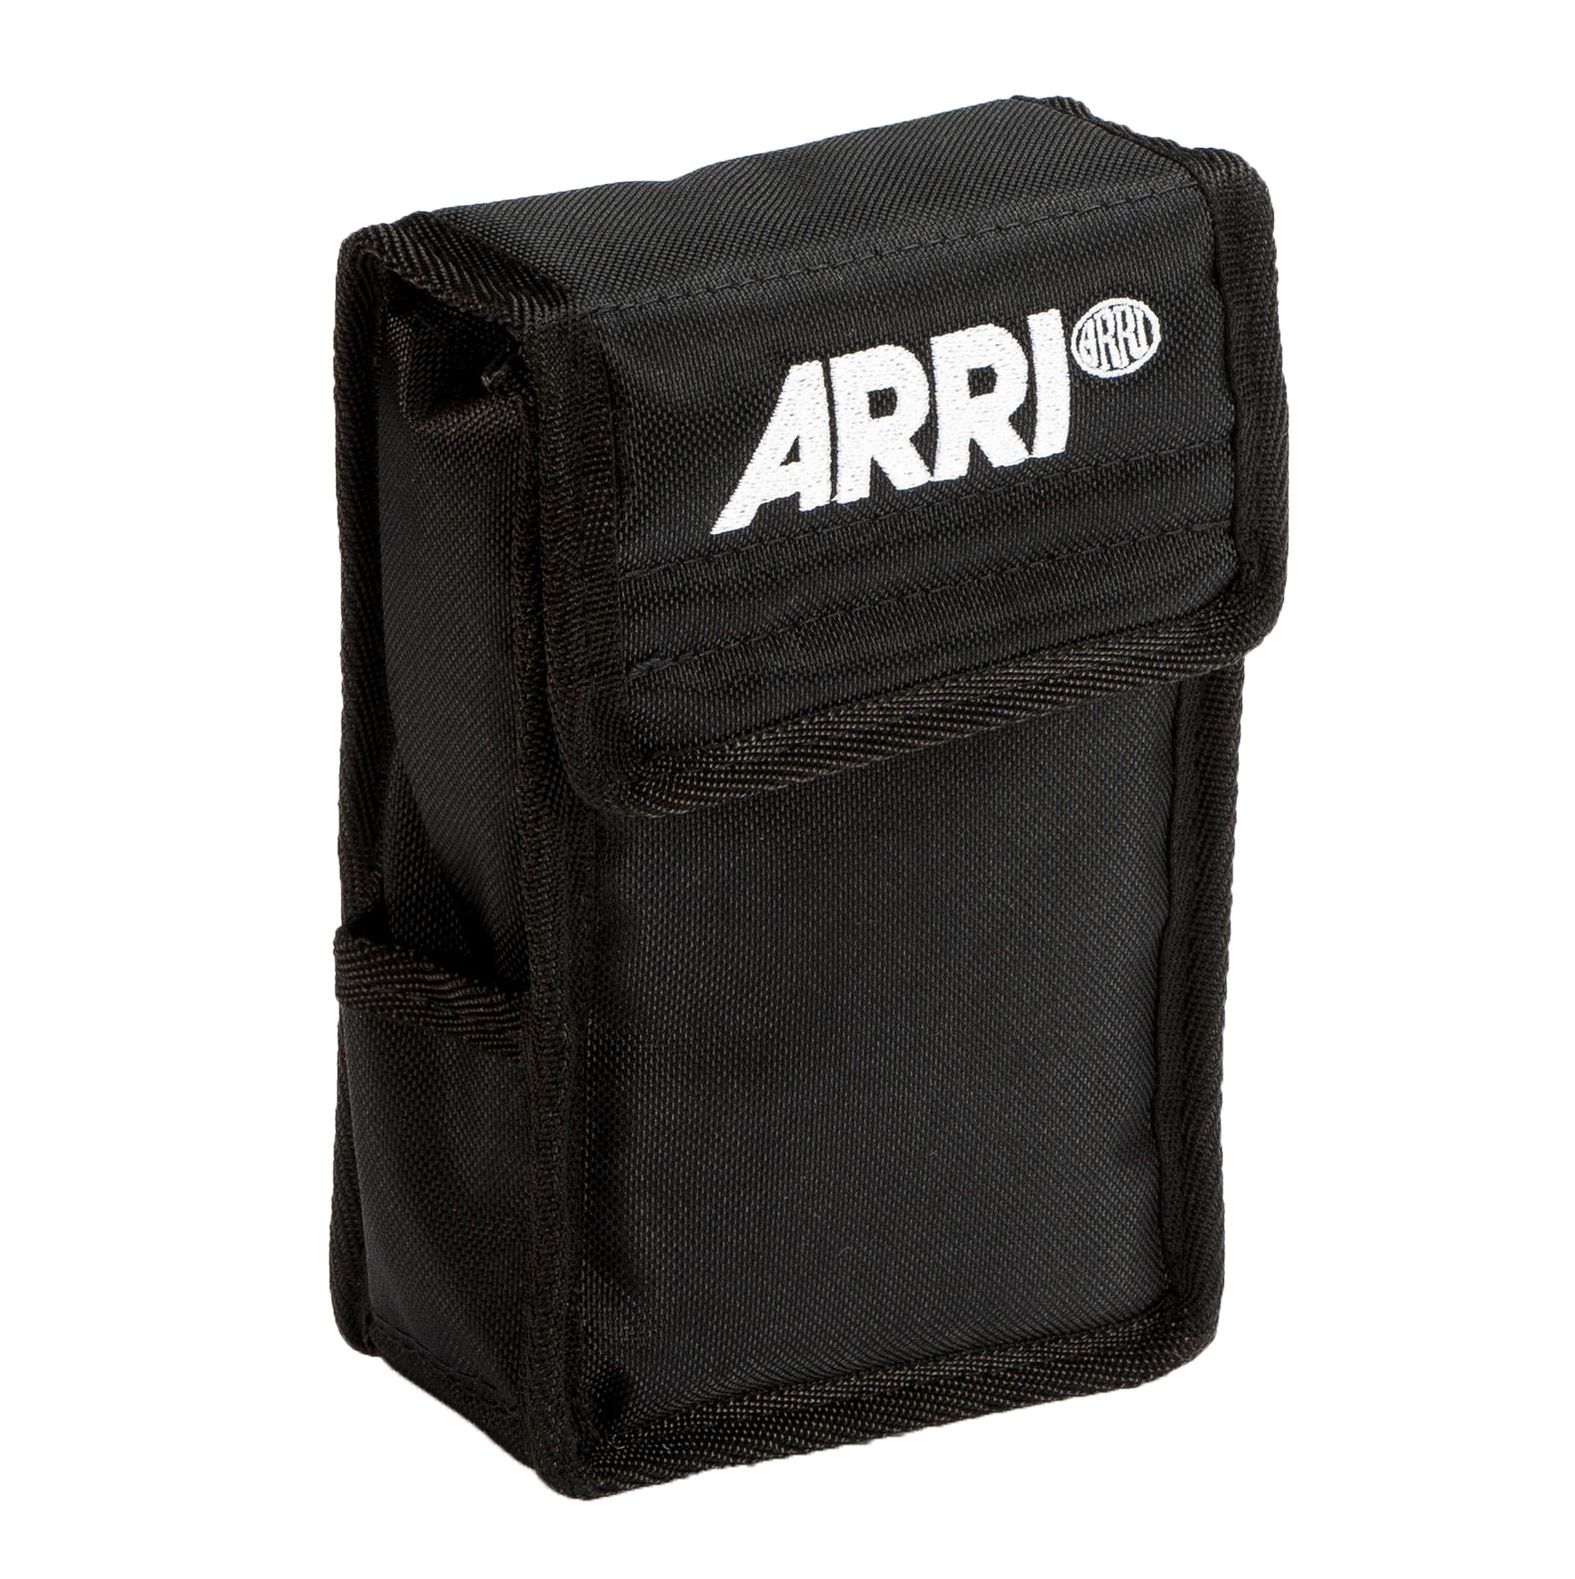 ARRI - SkyPanel Remote Carrying Pouch